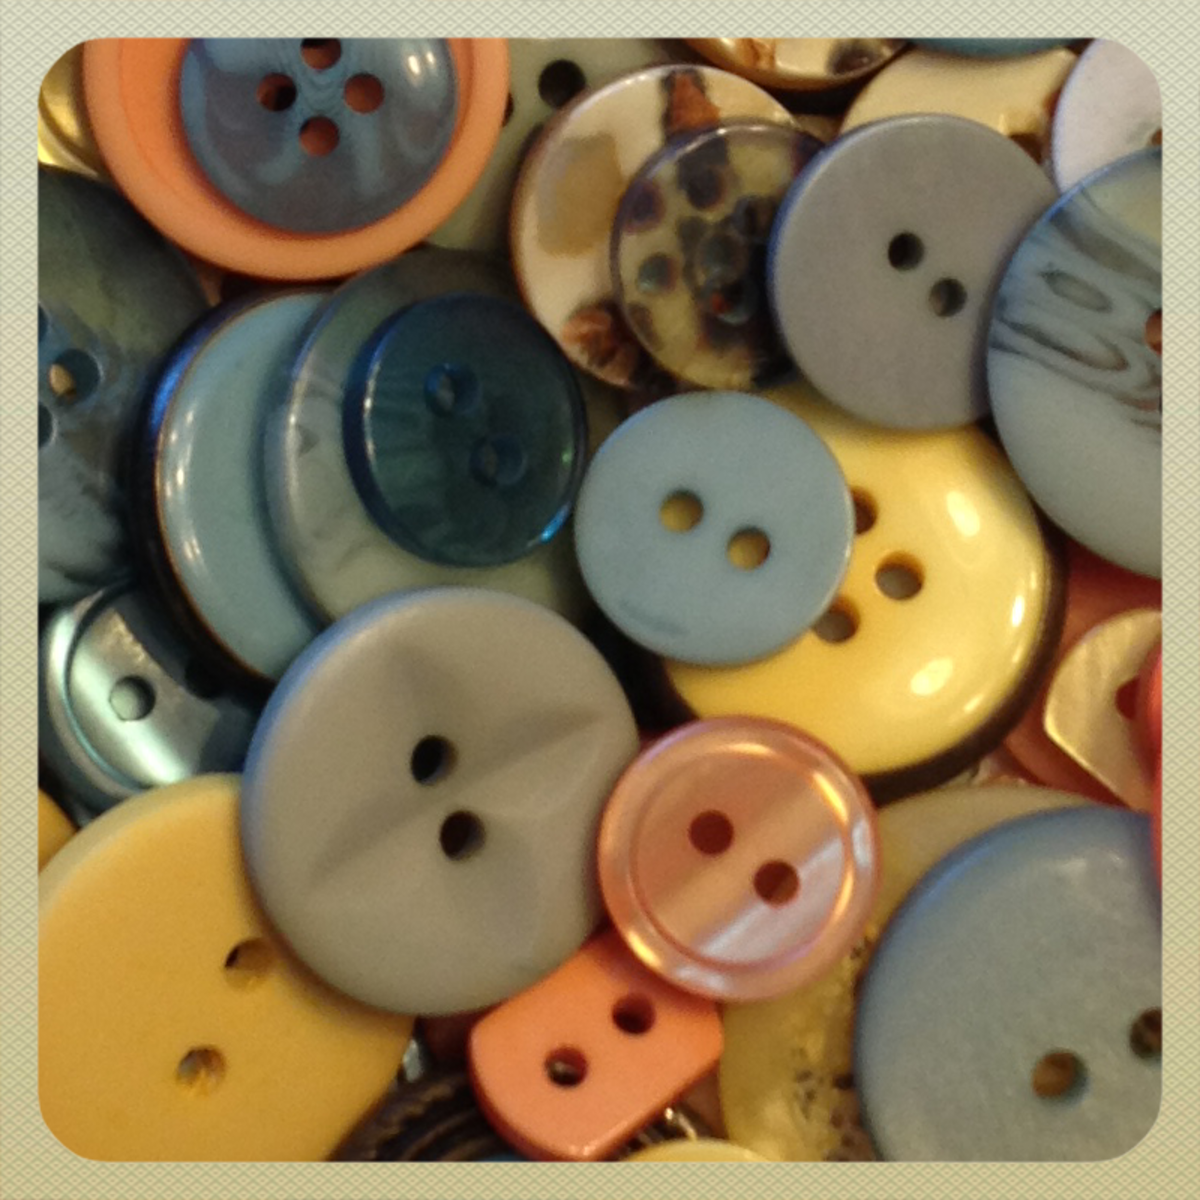 crafting with buttons